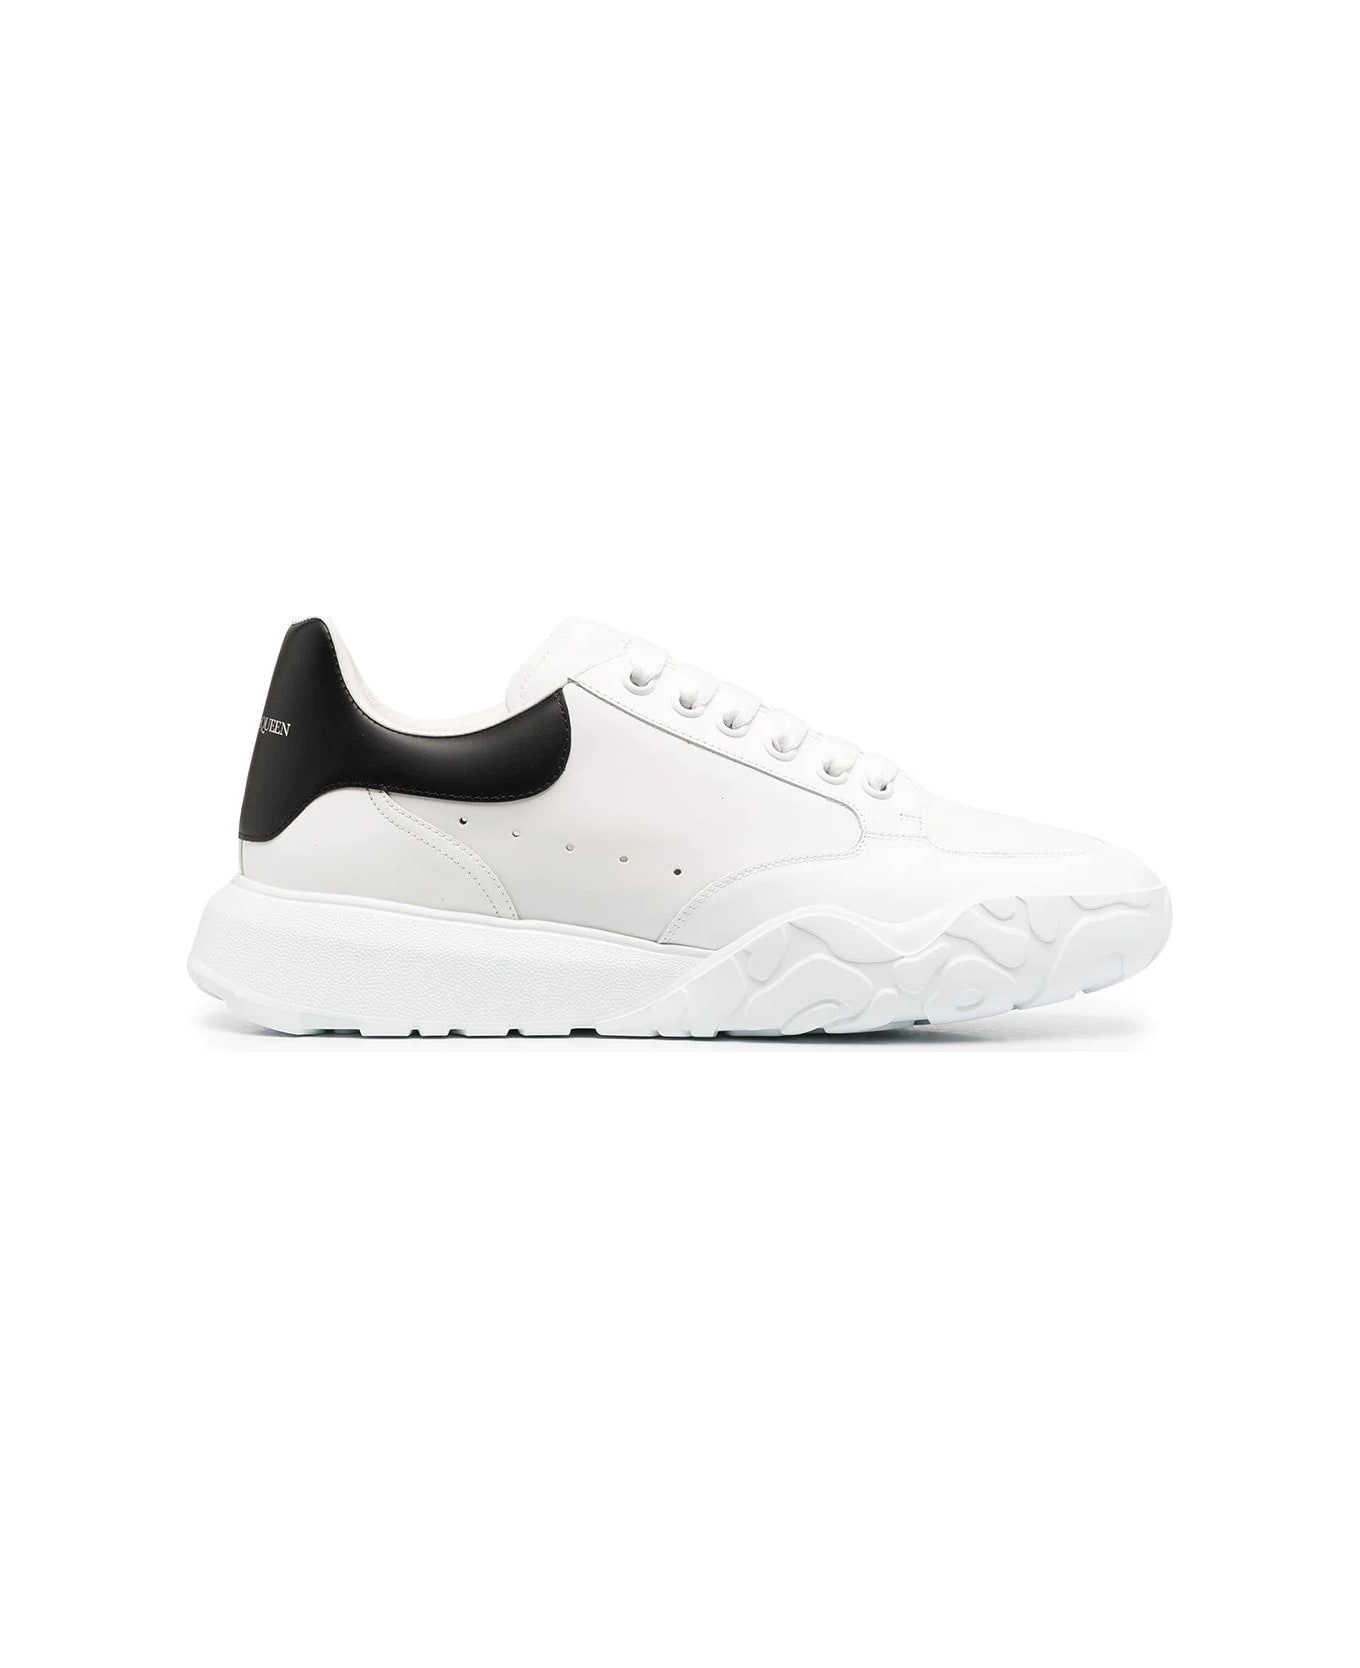 Alexander McQueen Trainer Court Oversize Sneakers In White And Black - White